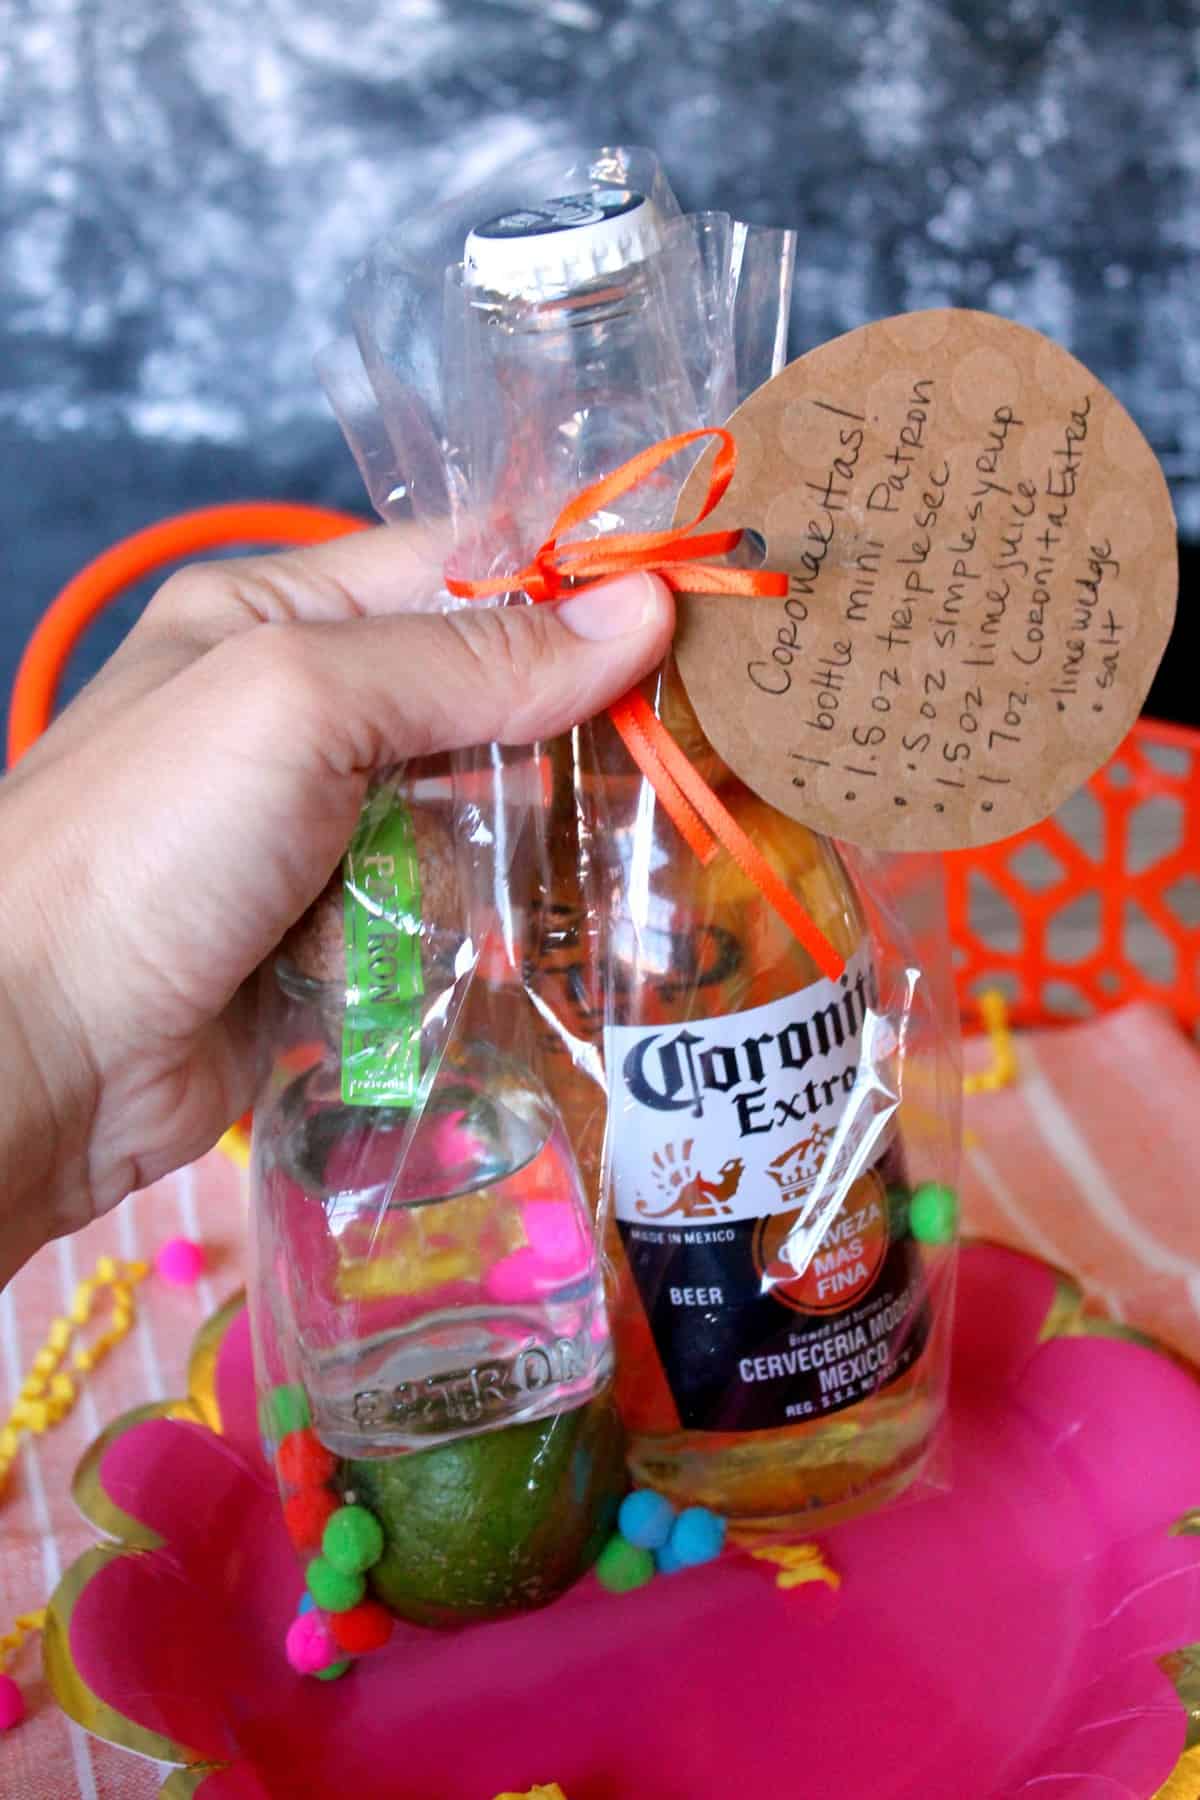 Let party-goers take the fiesta "to go" with these adorable Margarita Party Favors! A few margarita-making essentials all bundled up in a festive little bag. Bust them out at your Cinco de Mayo party or summer barbecue and there will be "cheers" all around!